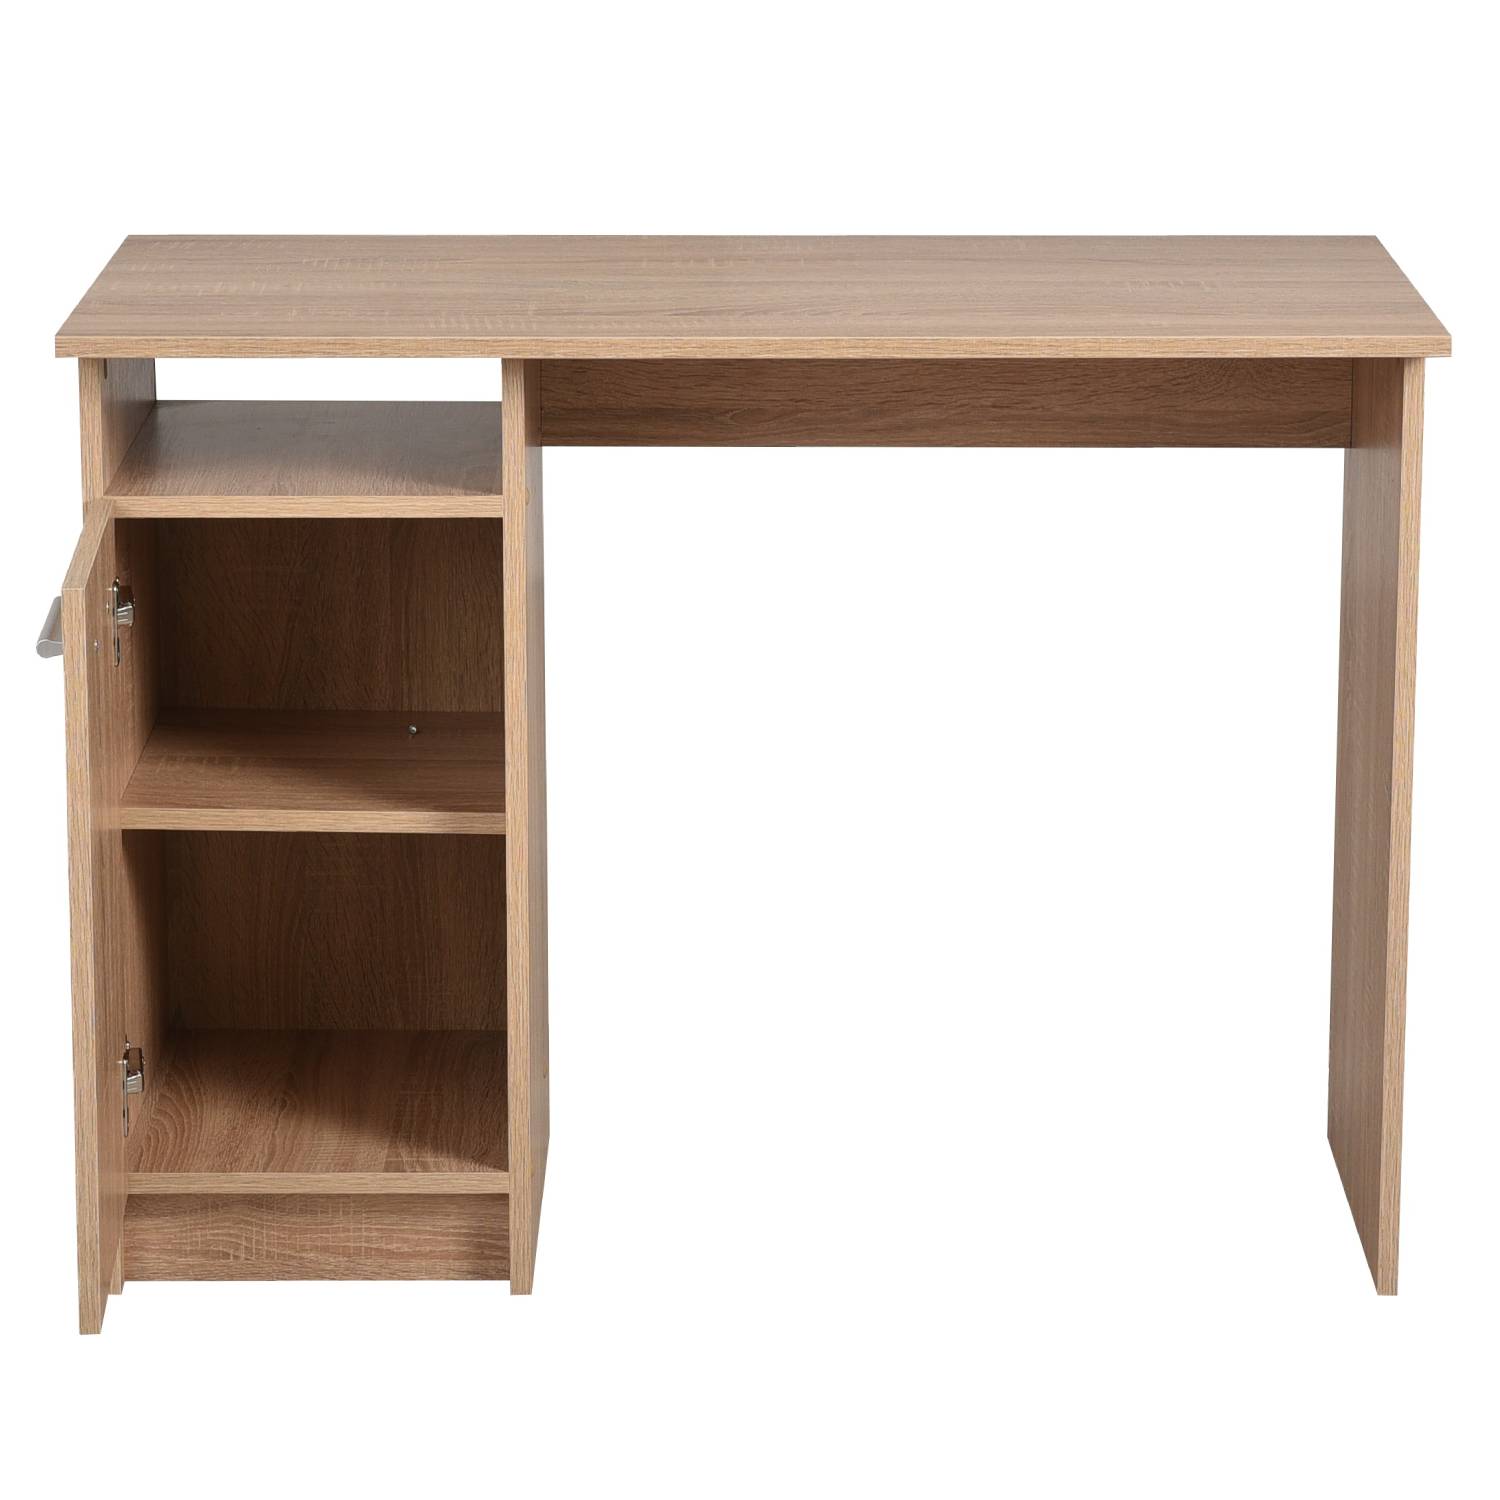 Desk computer table office table nature white 50x100 work table wood space-saving